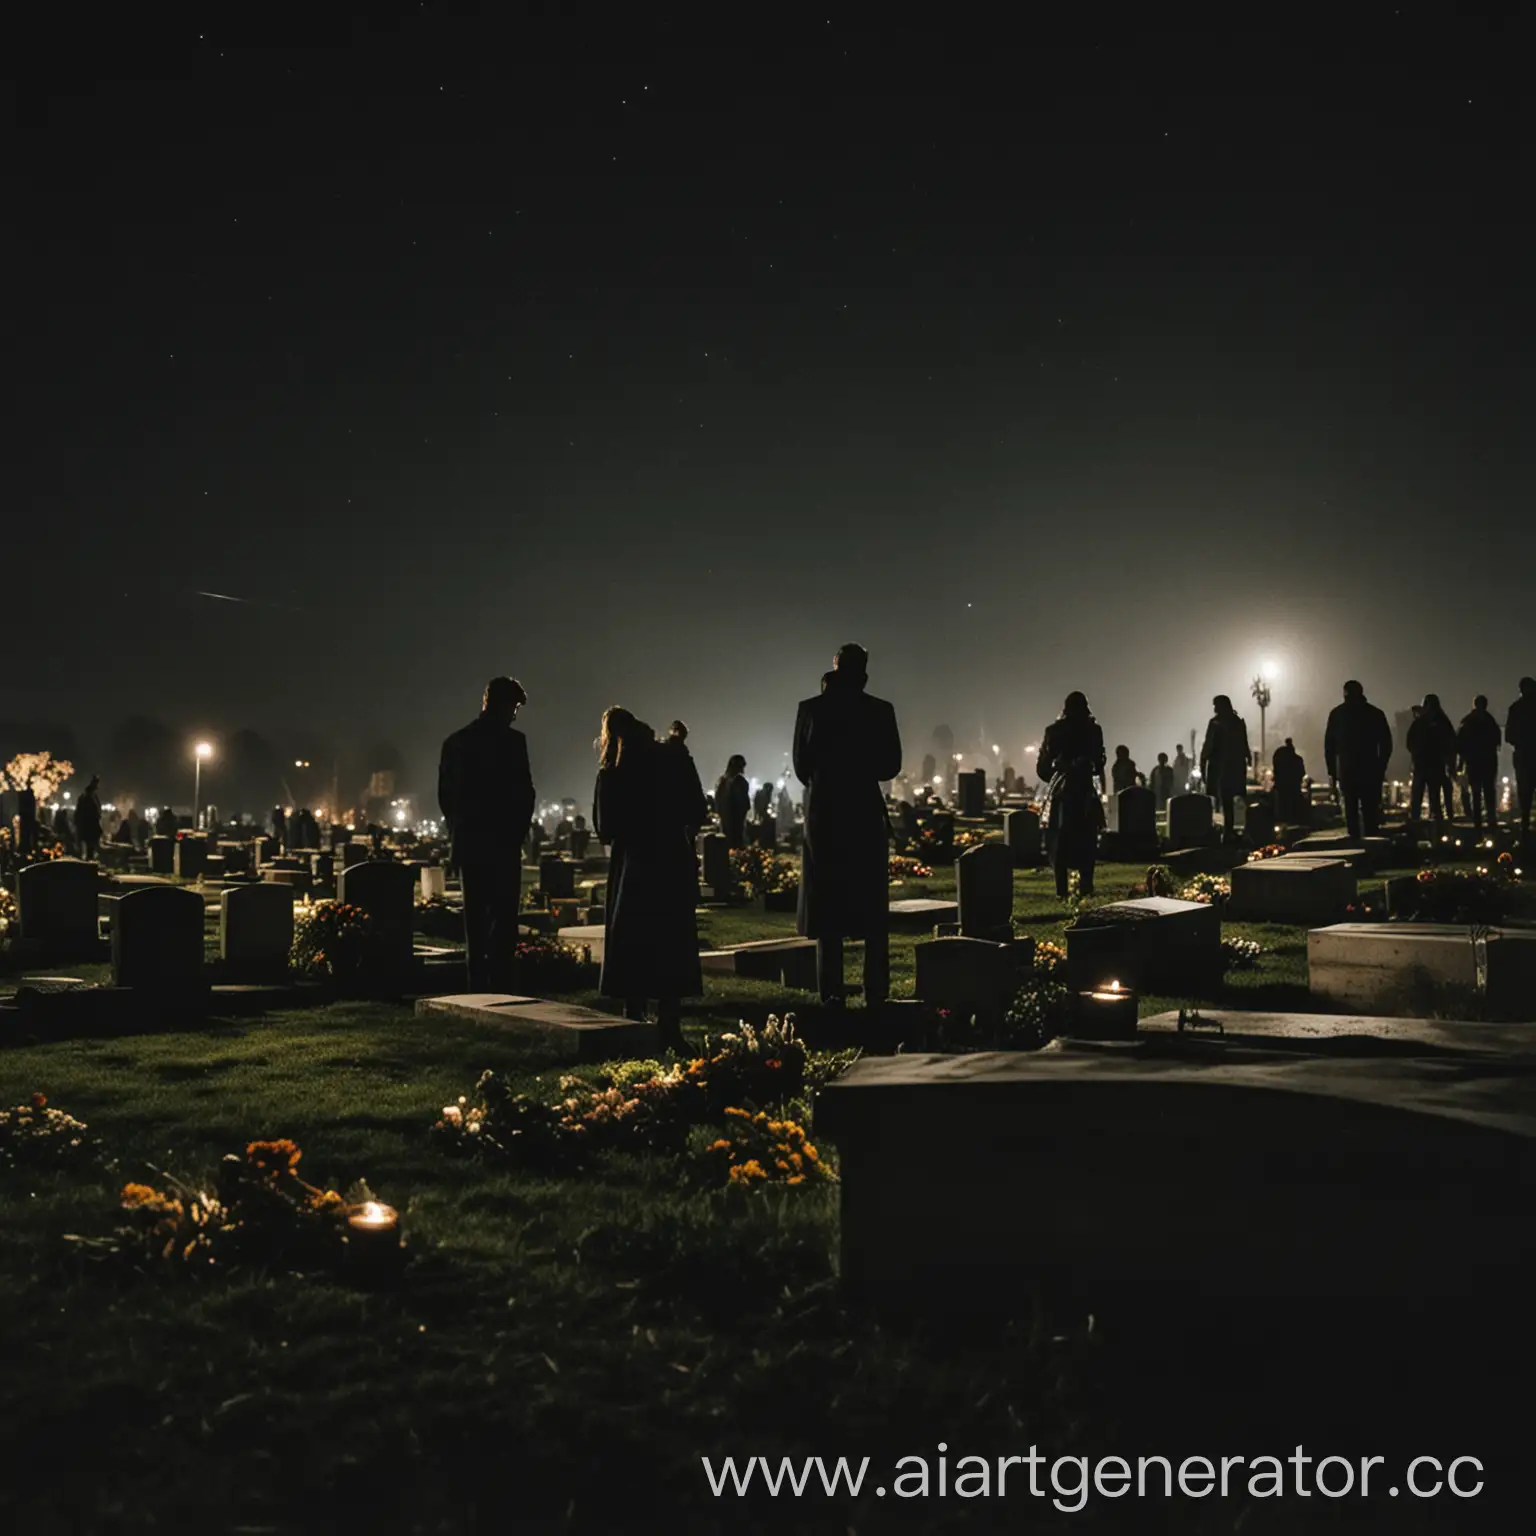 People near the grave at the cemetery at night funerals